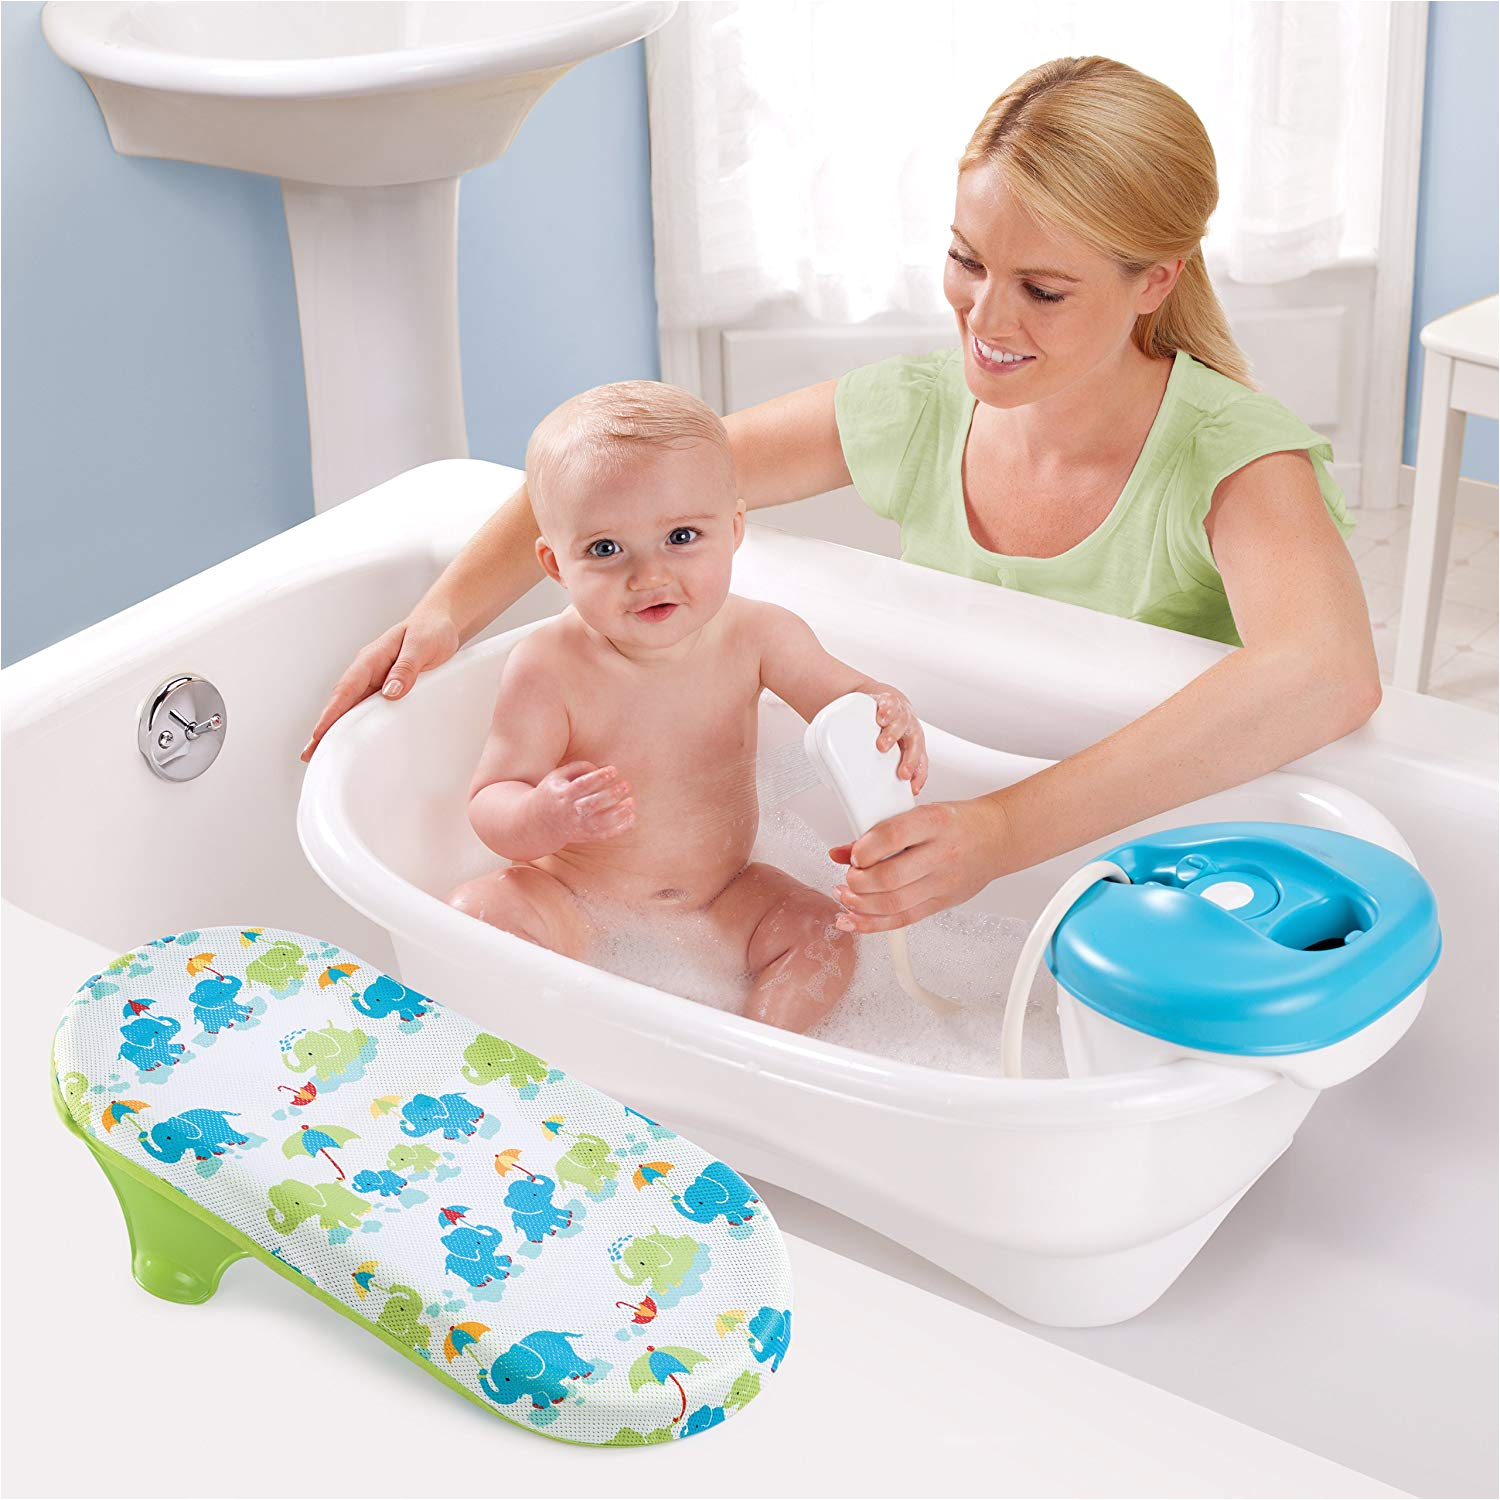 top 10 best large size baby bath tubs reviews 2016 2017 49qacff4y